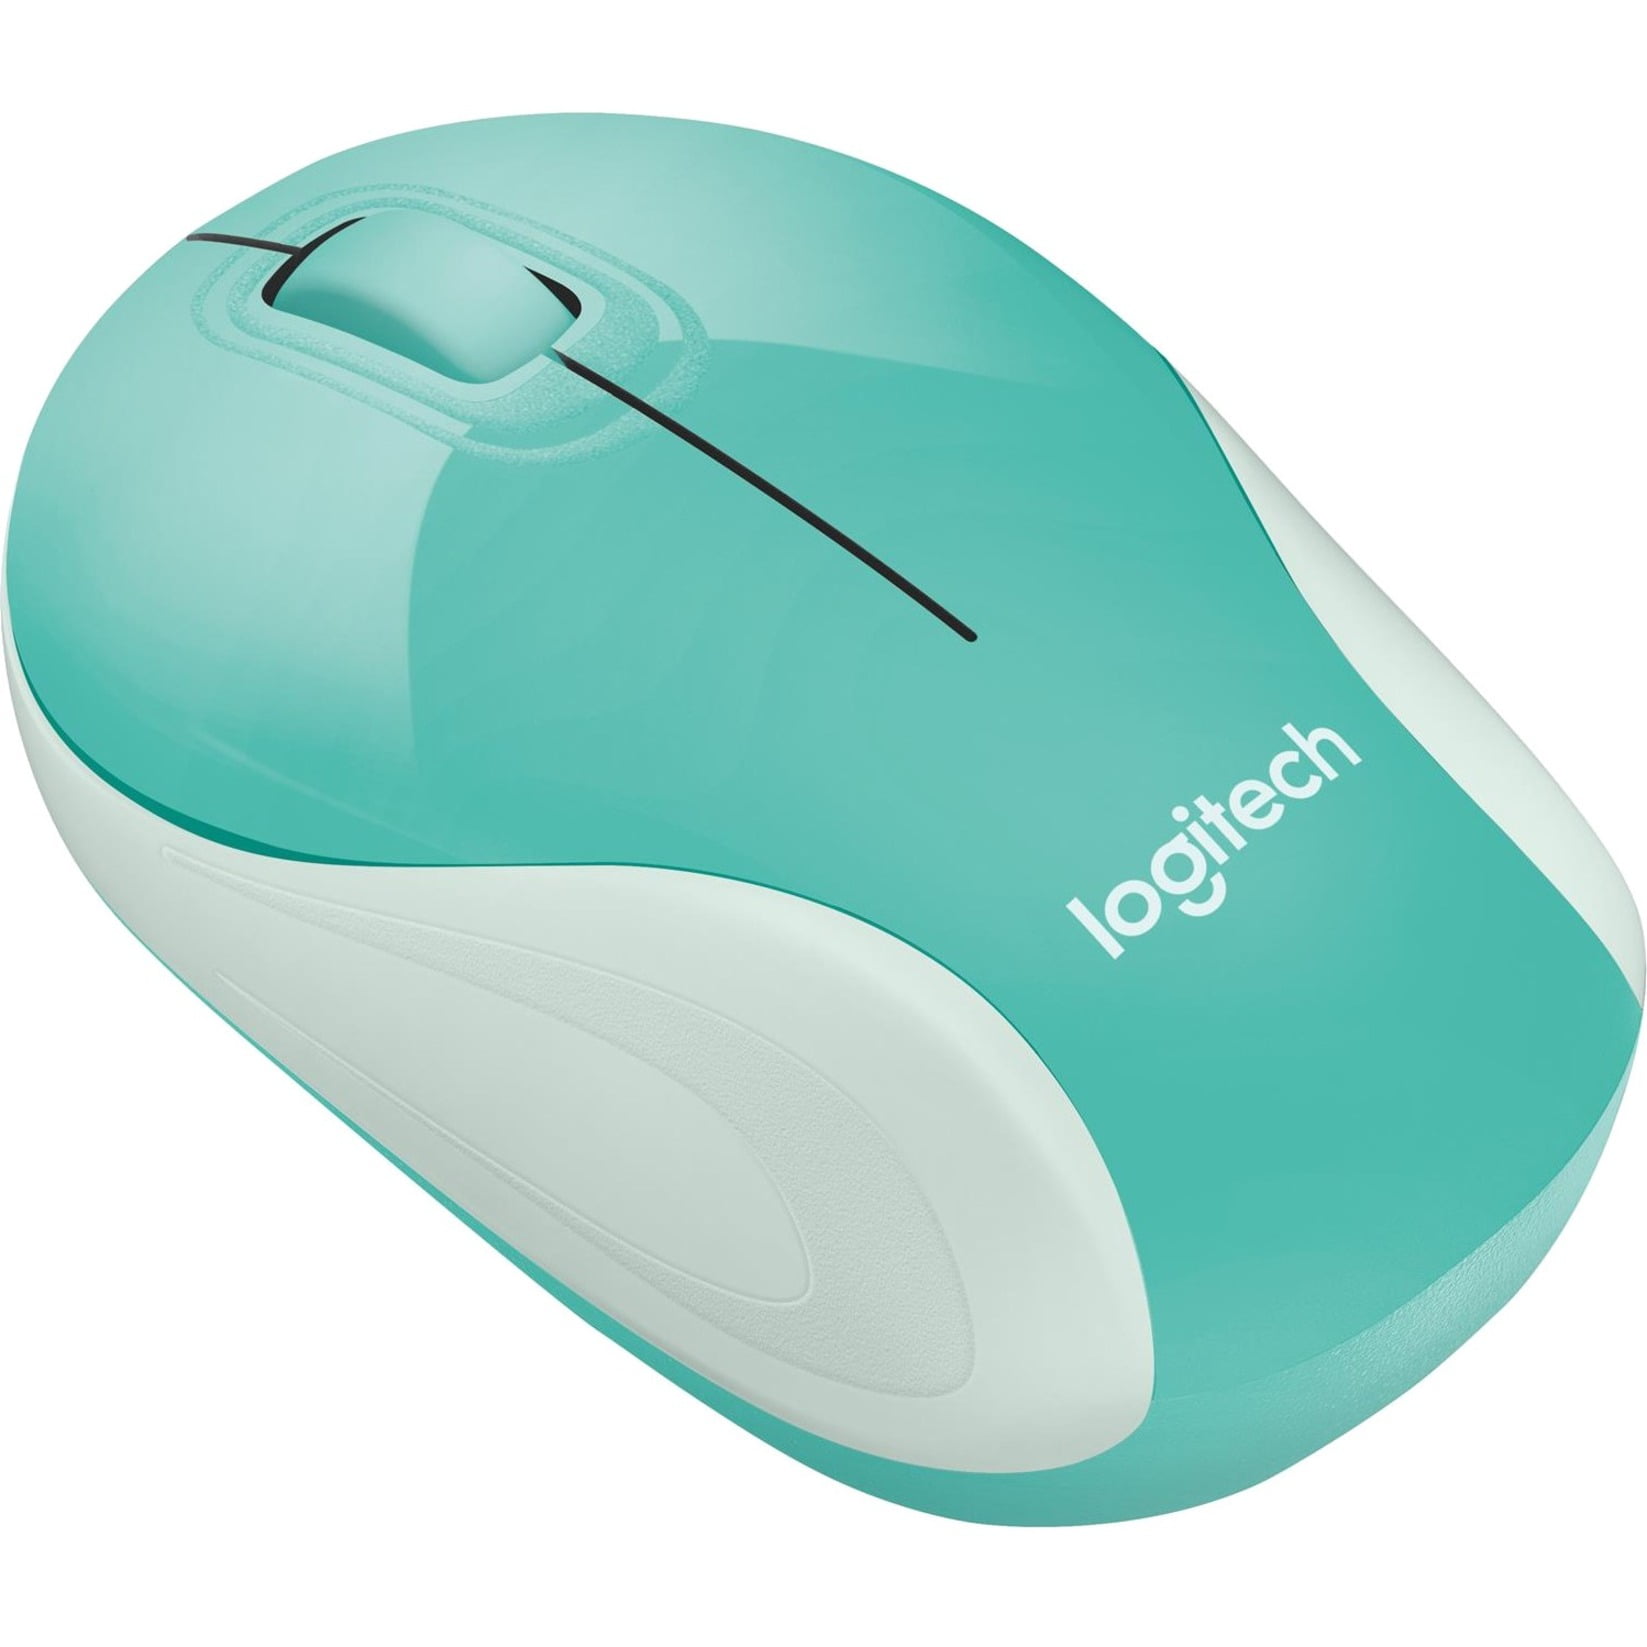 Unifying Mini Receiver, M187 Wireless Logitech Mouse Ultra USB Blossom Portable,